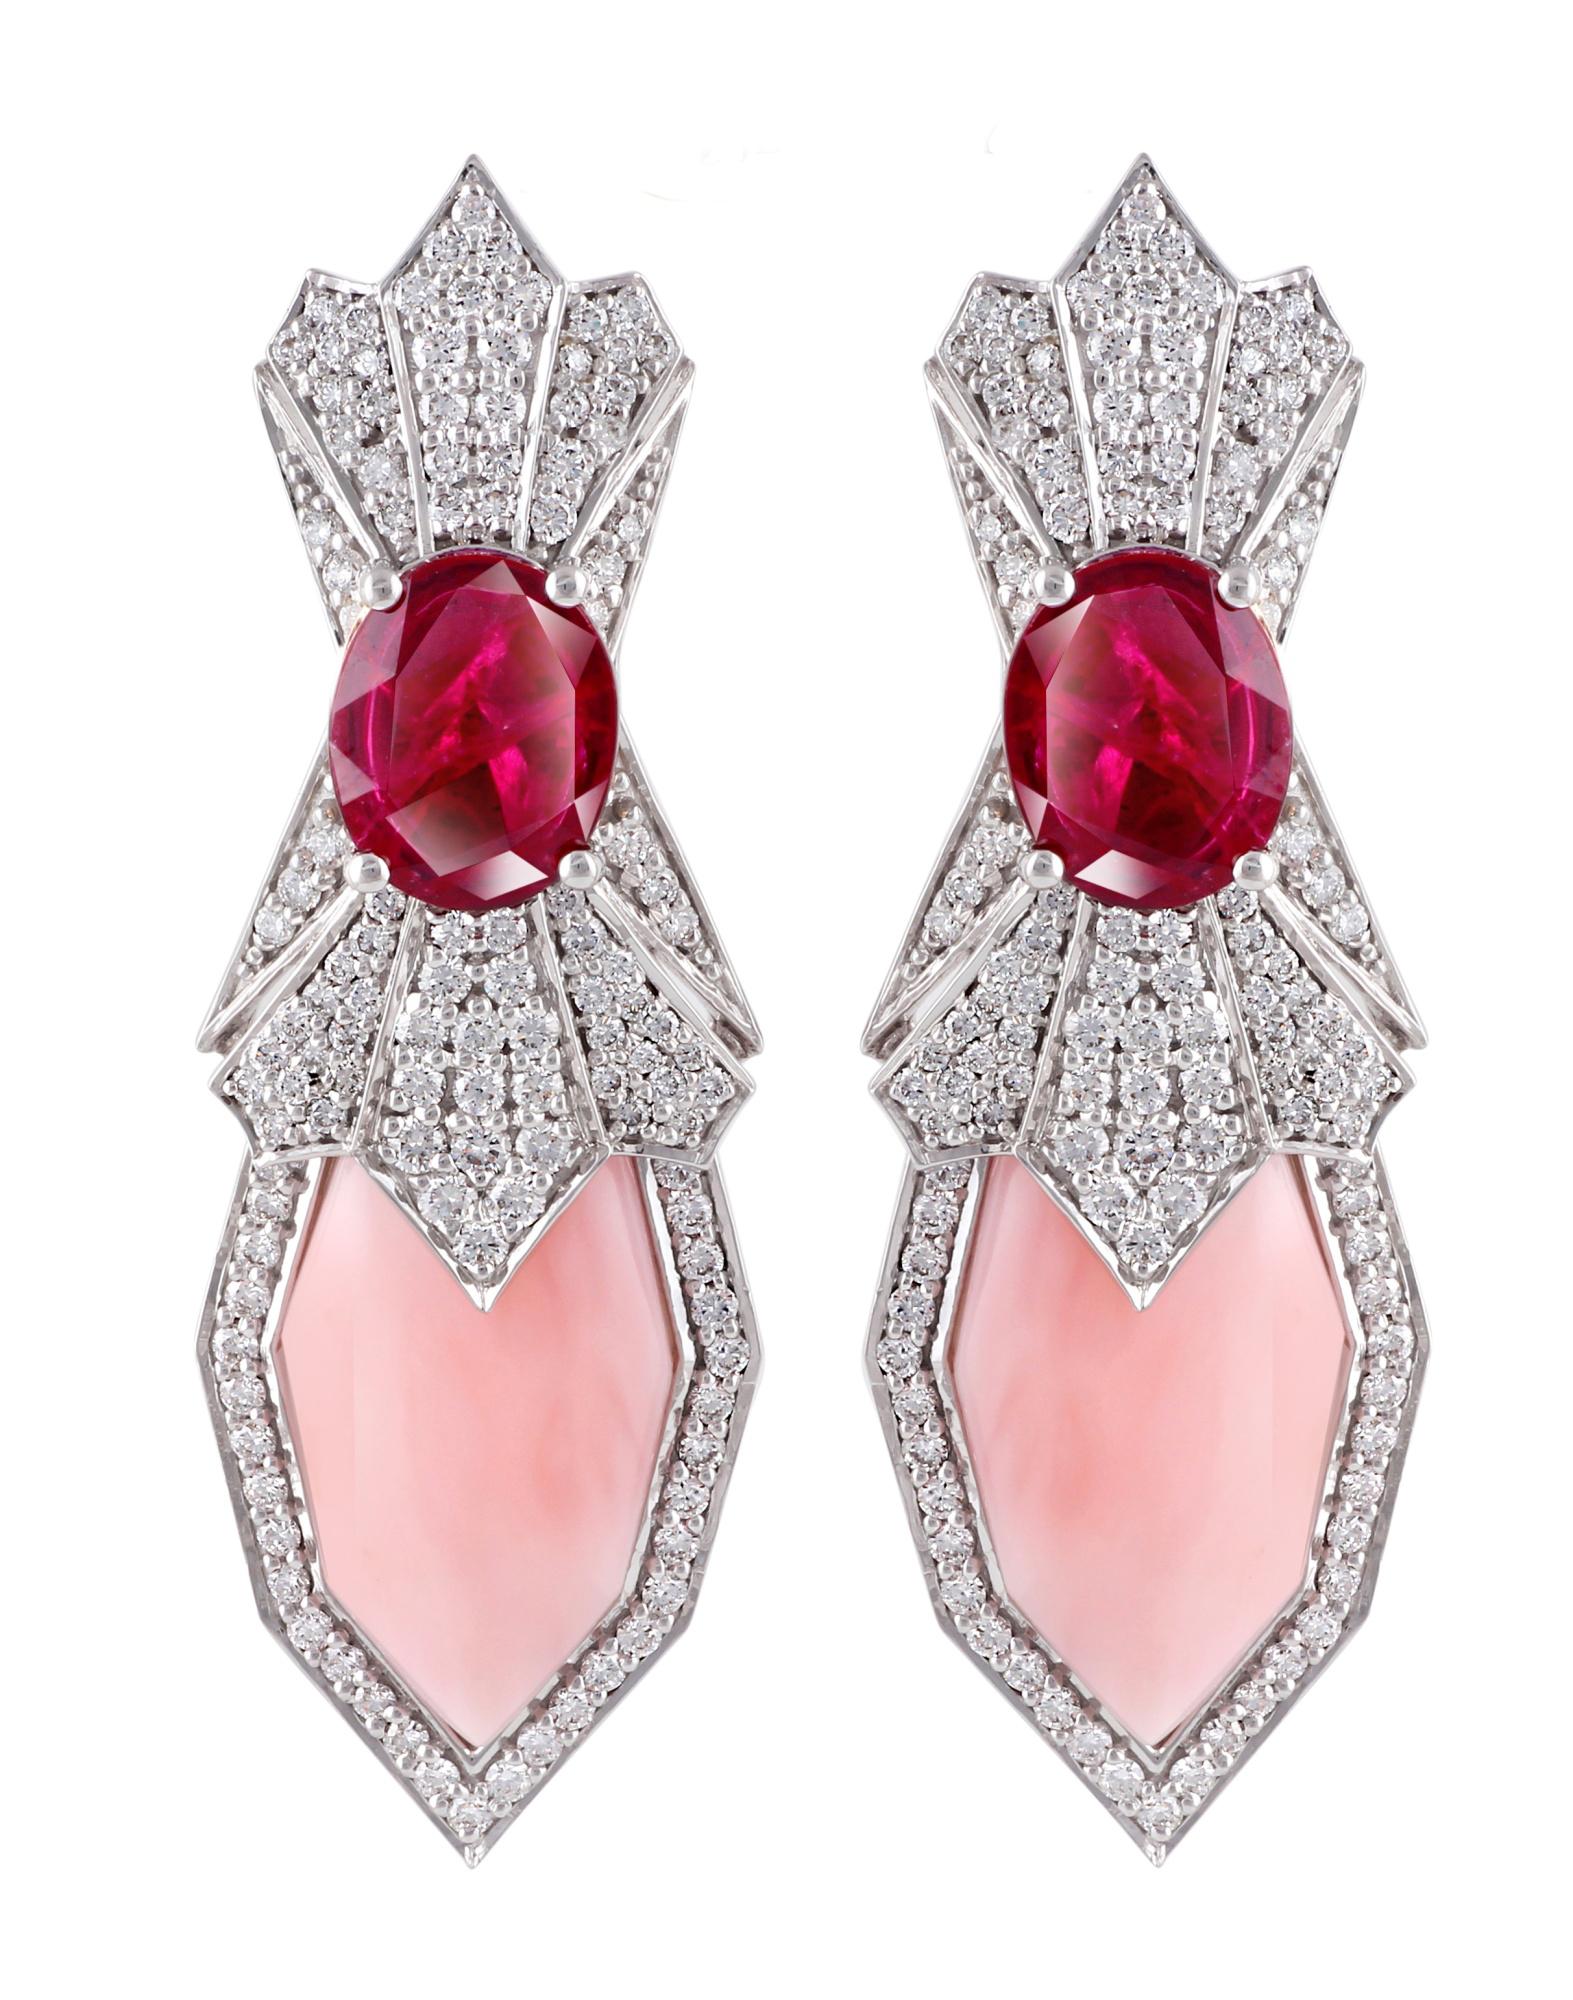 Modern Ananya White Gold Earrings Set with Rubies, Pink Opals and Diamonds